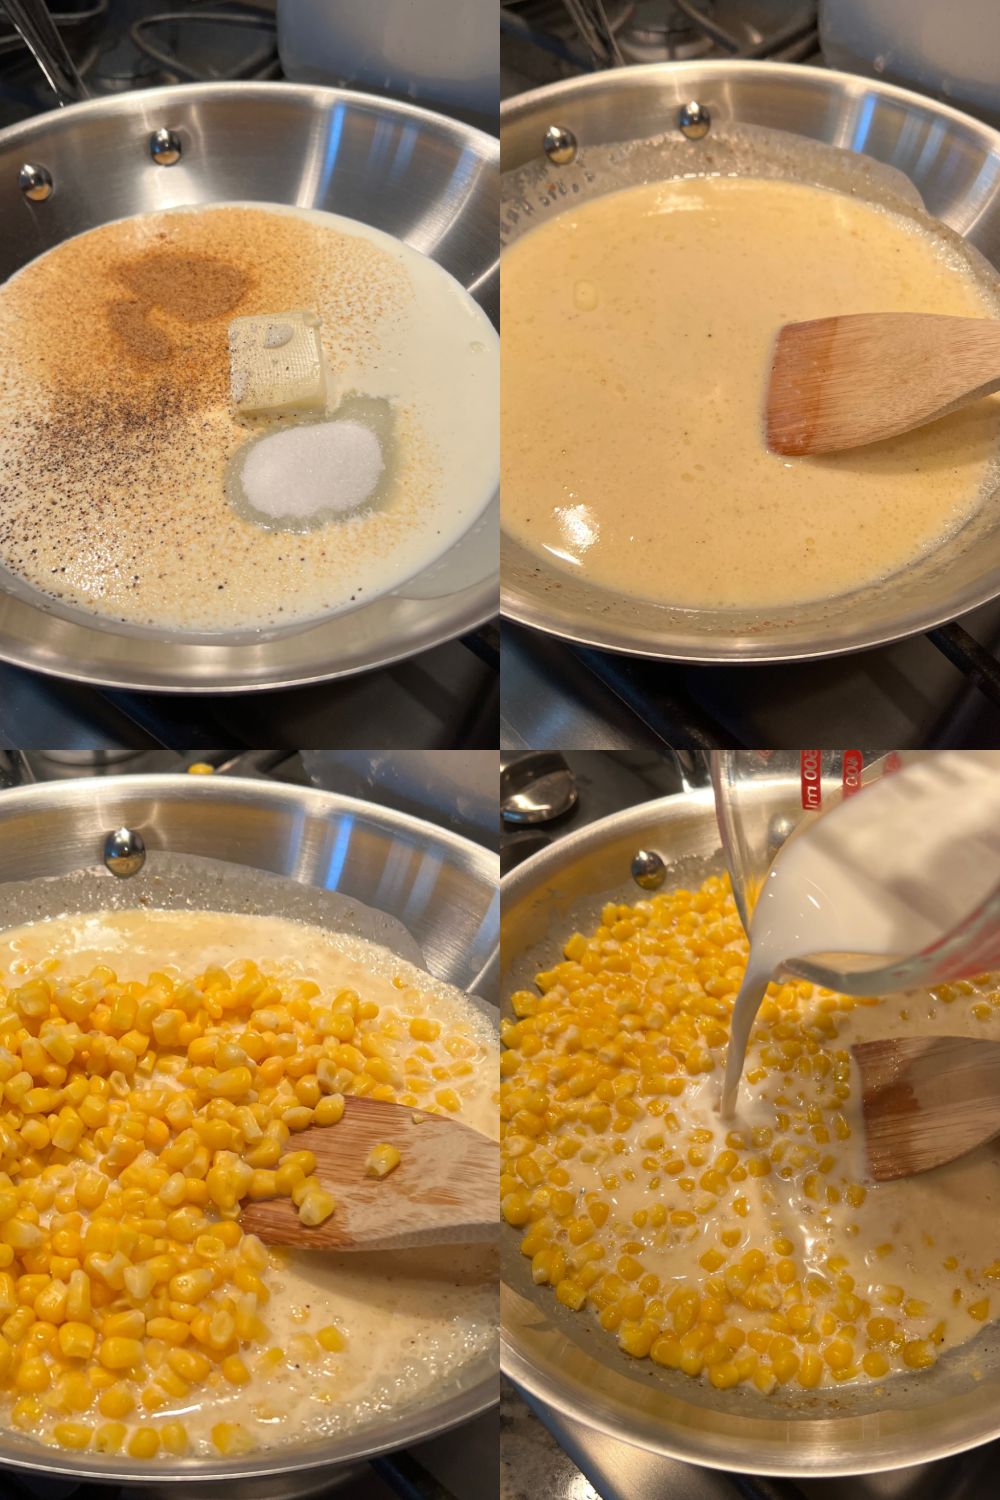 This is a 4 photo collage showing the Creamed Corn being made in a skillet on a stove top.